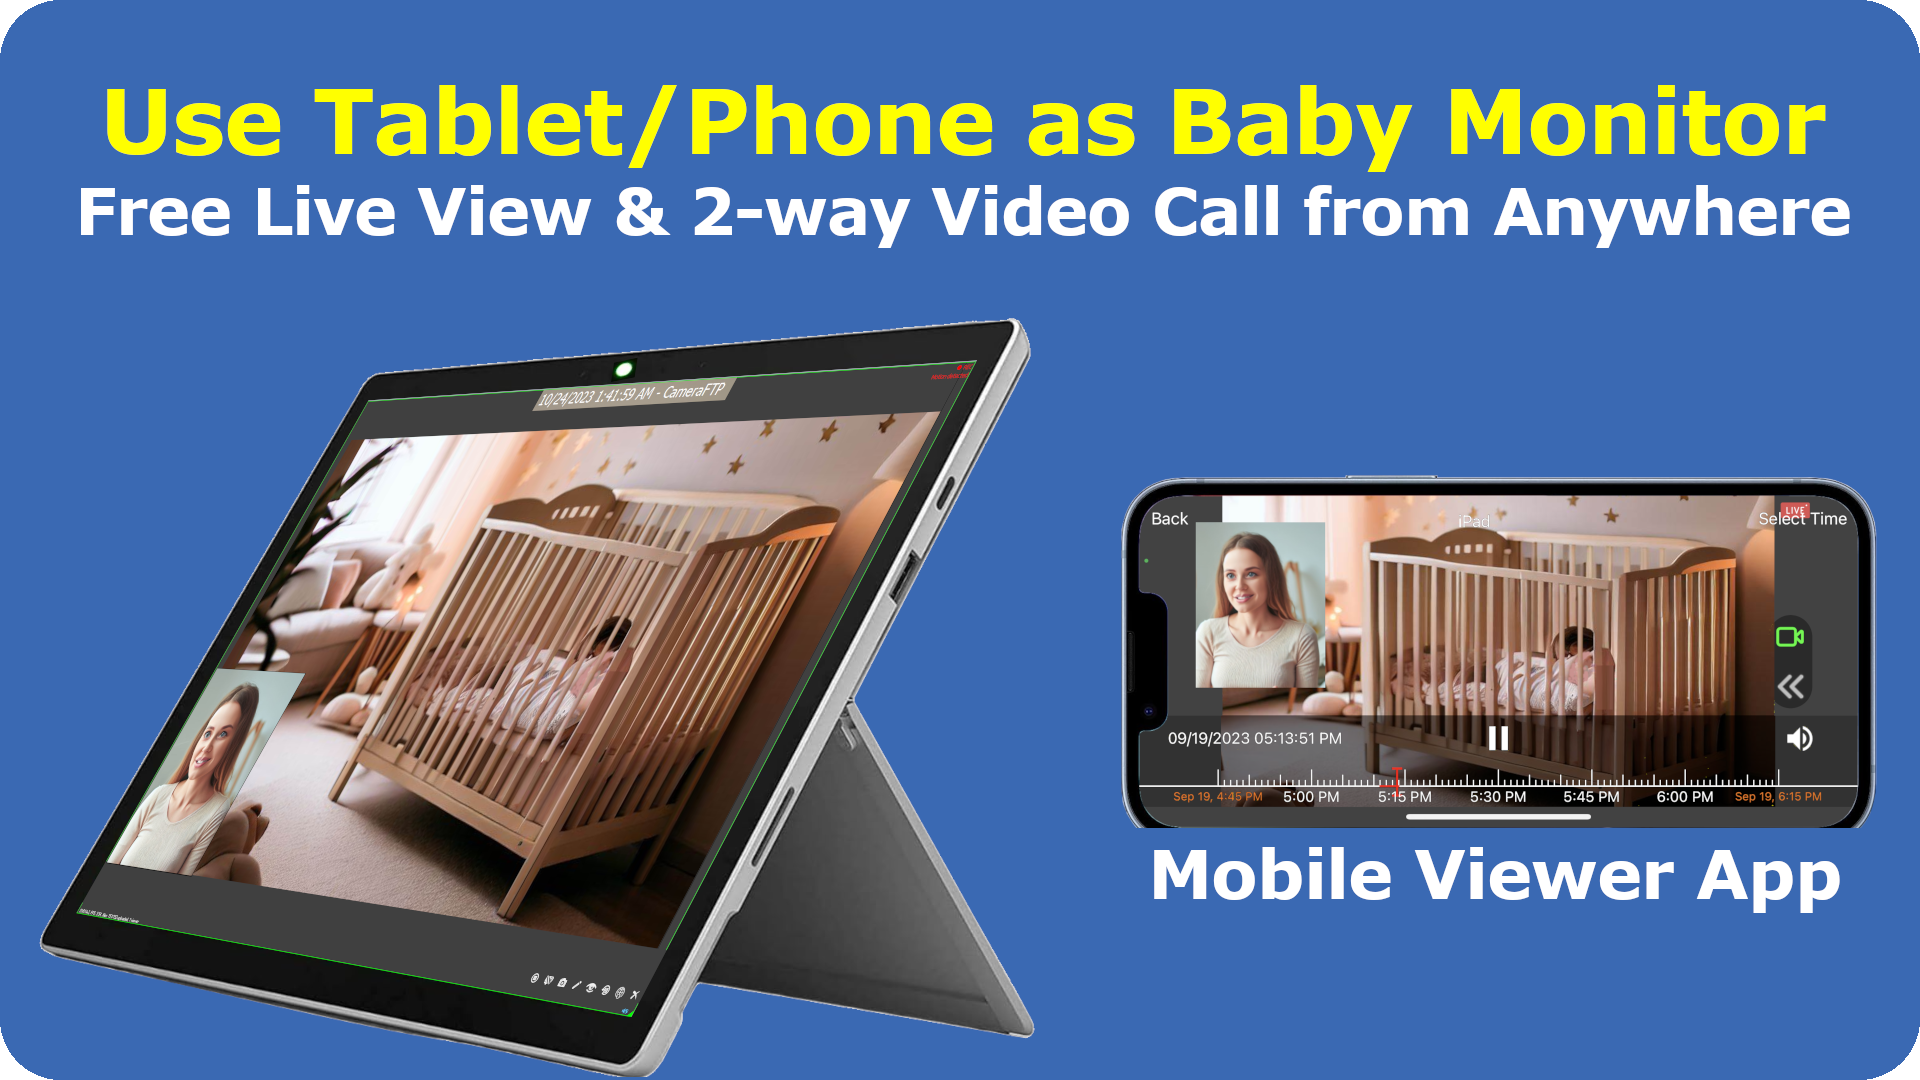 Use Tablet/phone/laptop/PC+Webcam as Baby Monitor or IP Camera. Live view and 2-way video calling